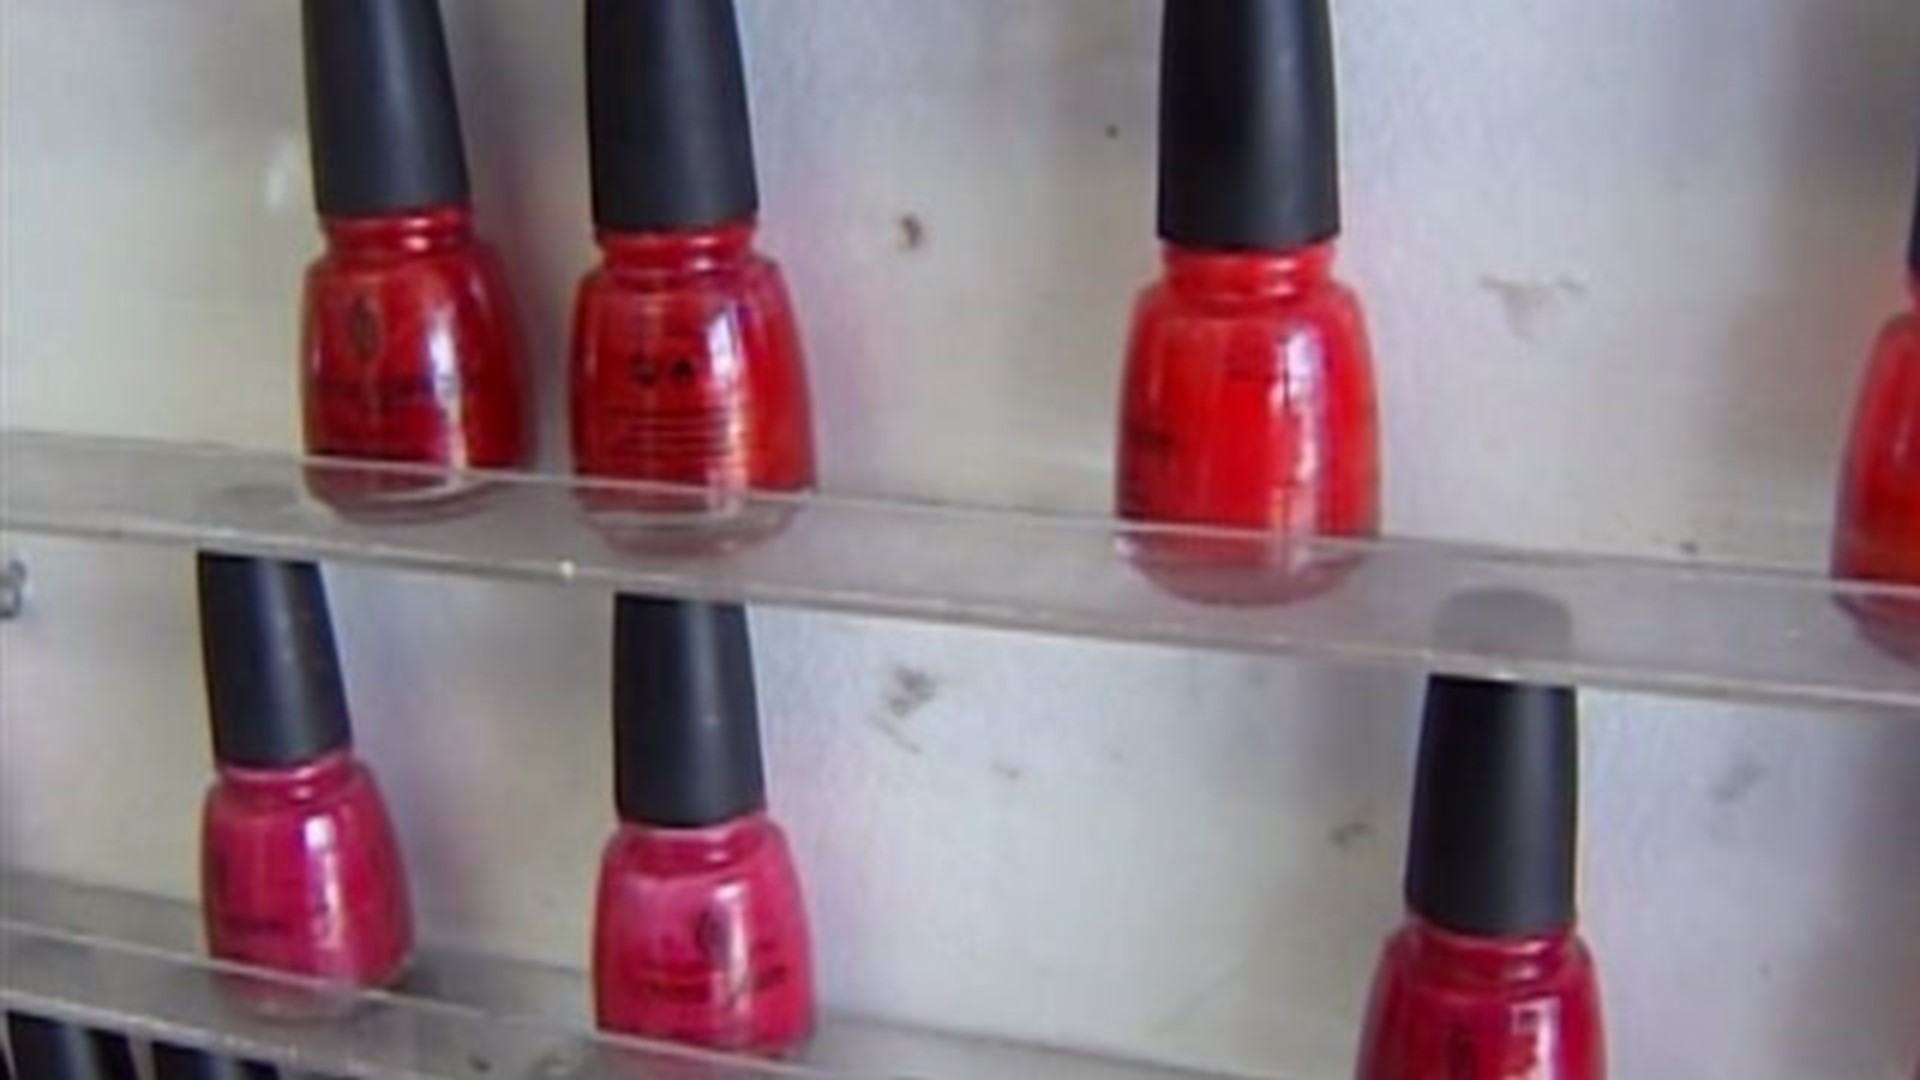 A Nail Polish That Could Save Your Life